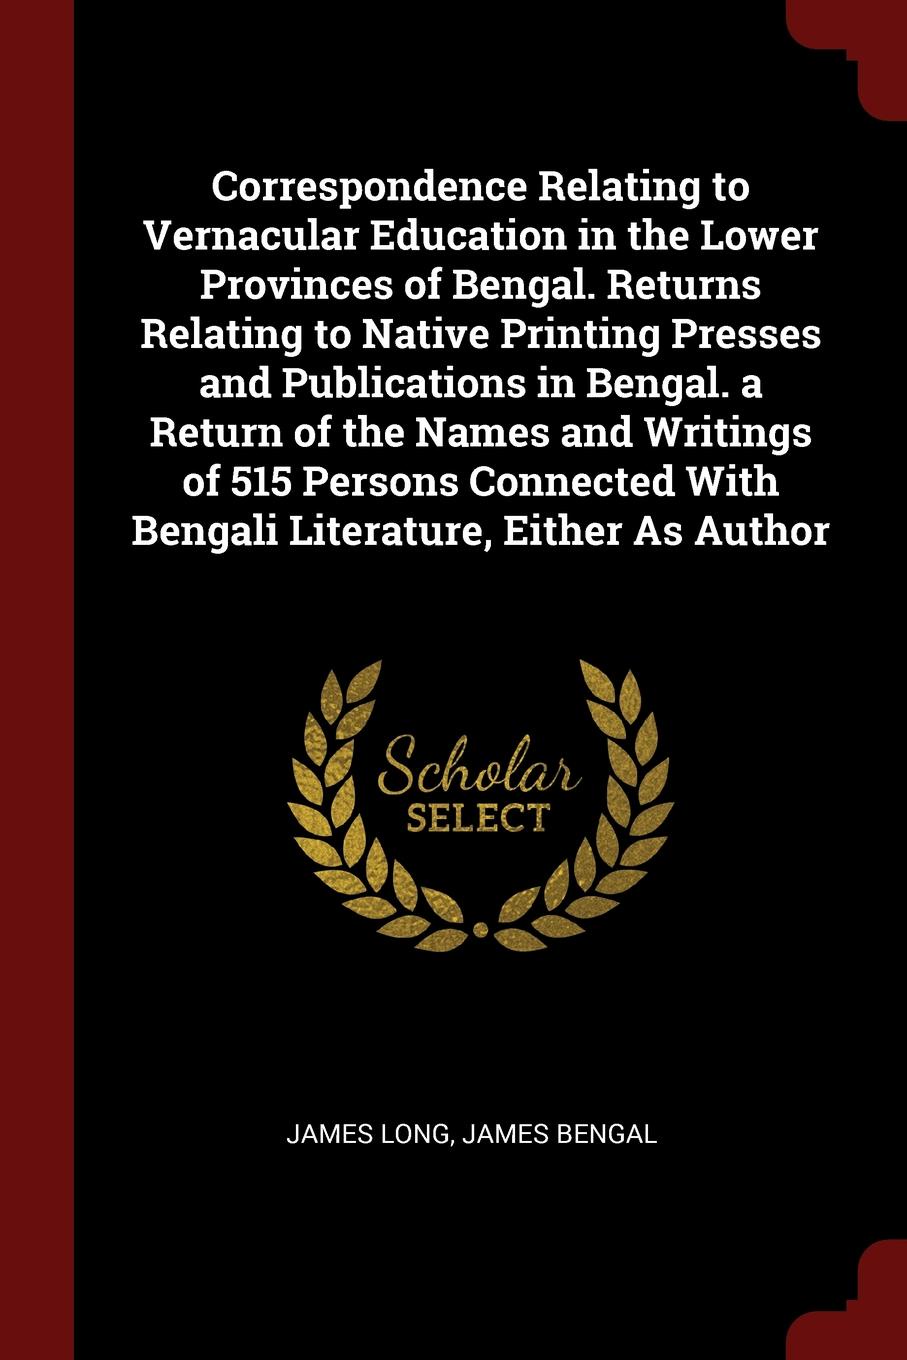 Correspondence Relating to Vernacular Education in the Lower Provinces of Bengal. Returns Relating to Native Printing Presses and Publications in Bengal. a Return of the Names and Writings of 515 Persons Connected With Bengali Literature, Either A...